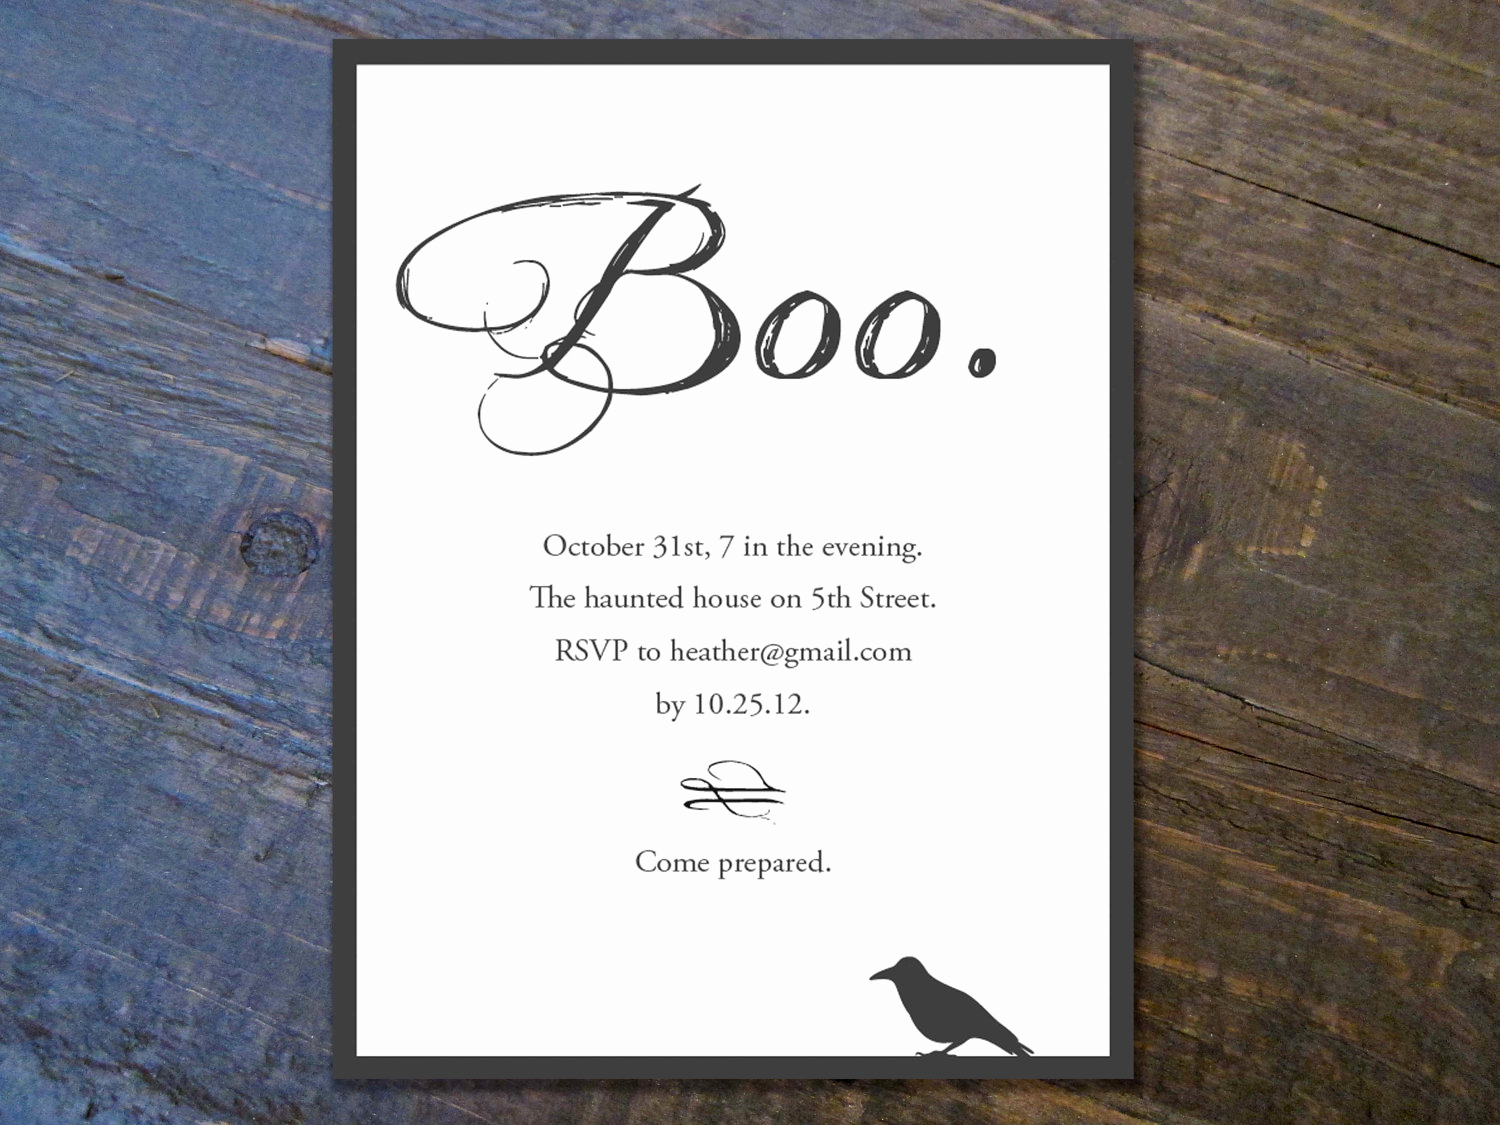 Free Invitation Template Printable Lovely Free Halloween Invitation Templates Printable – Festival